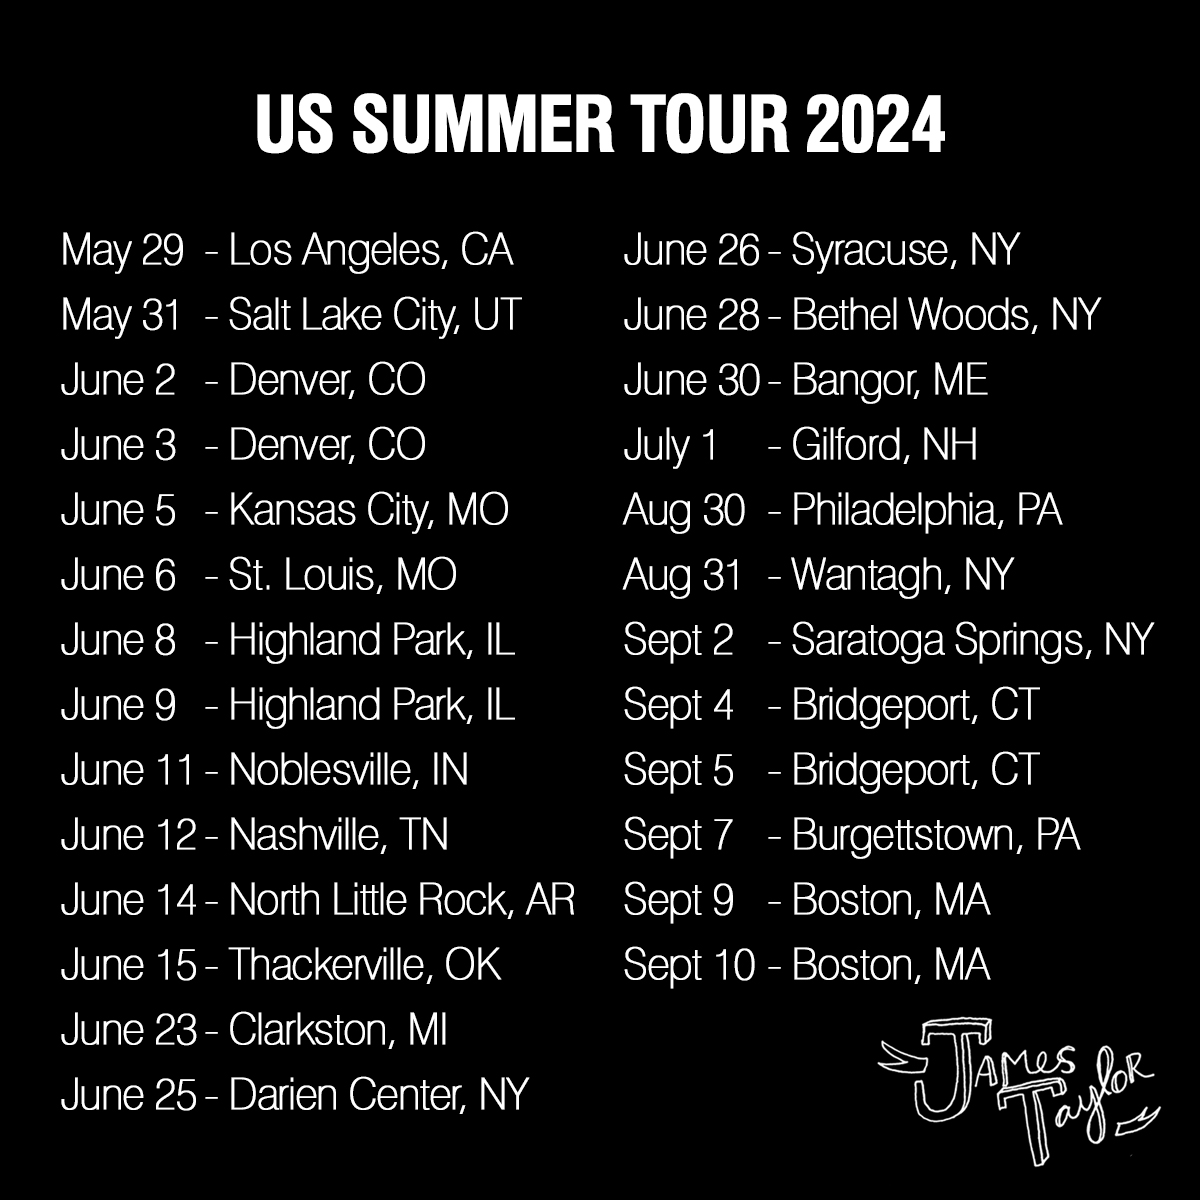 US Summer Tour announced! Presales start on Feb 21 at 10am local time - please visit the website for full details. A JamesTaylor.com account is required to participate, so register now if you're not already a member. tour.jamestaylor.com #JT #JamesTaylor #2024Tour